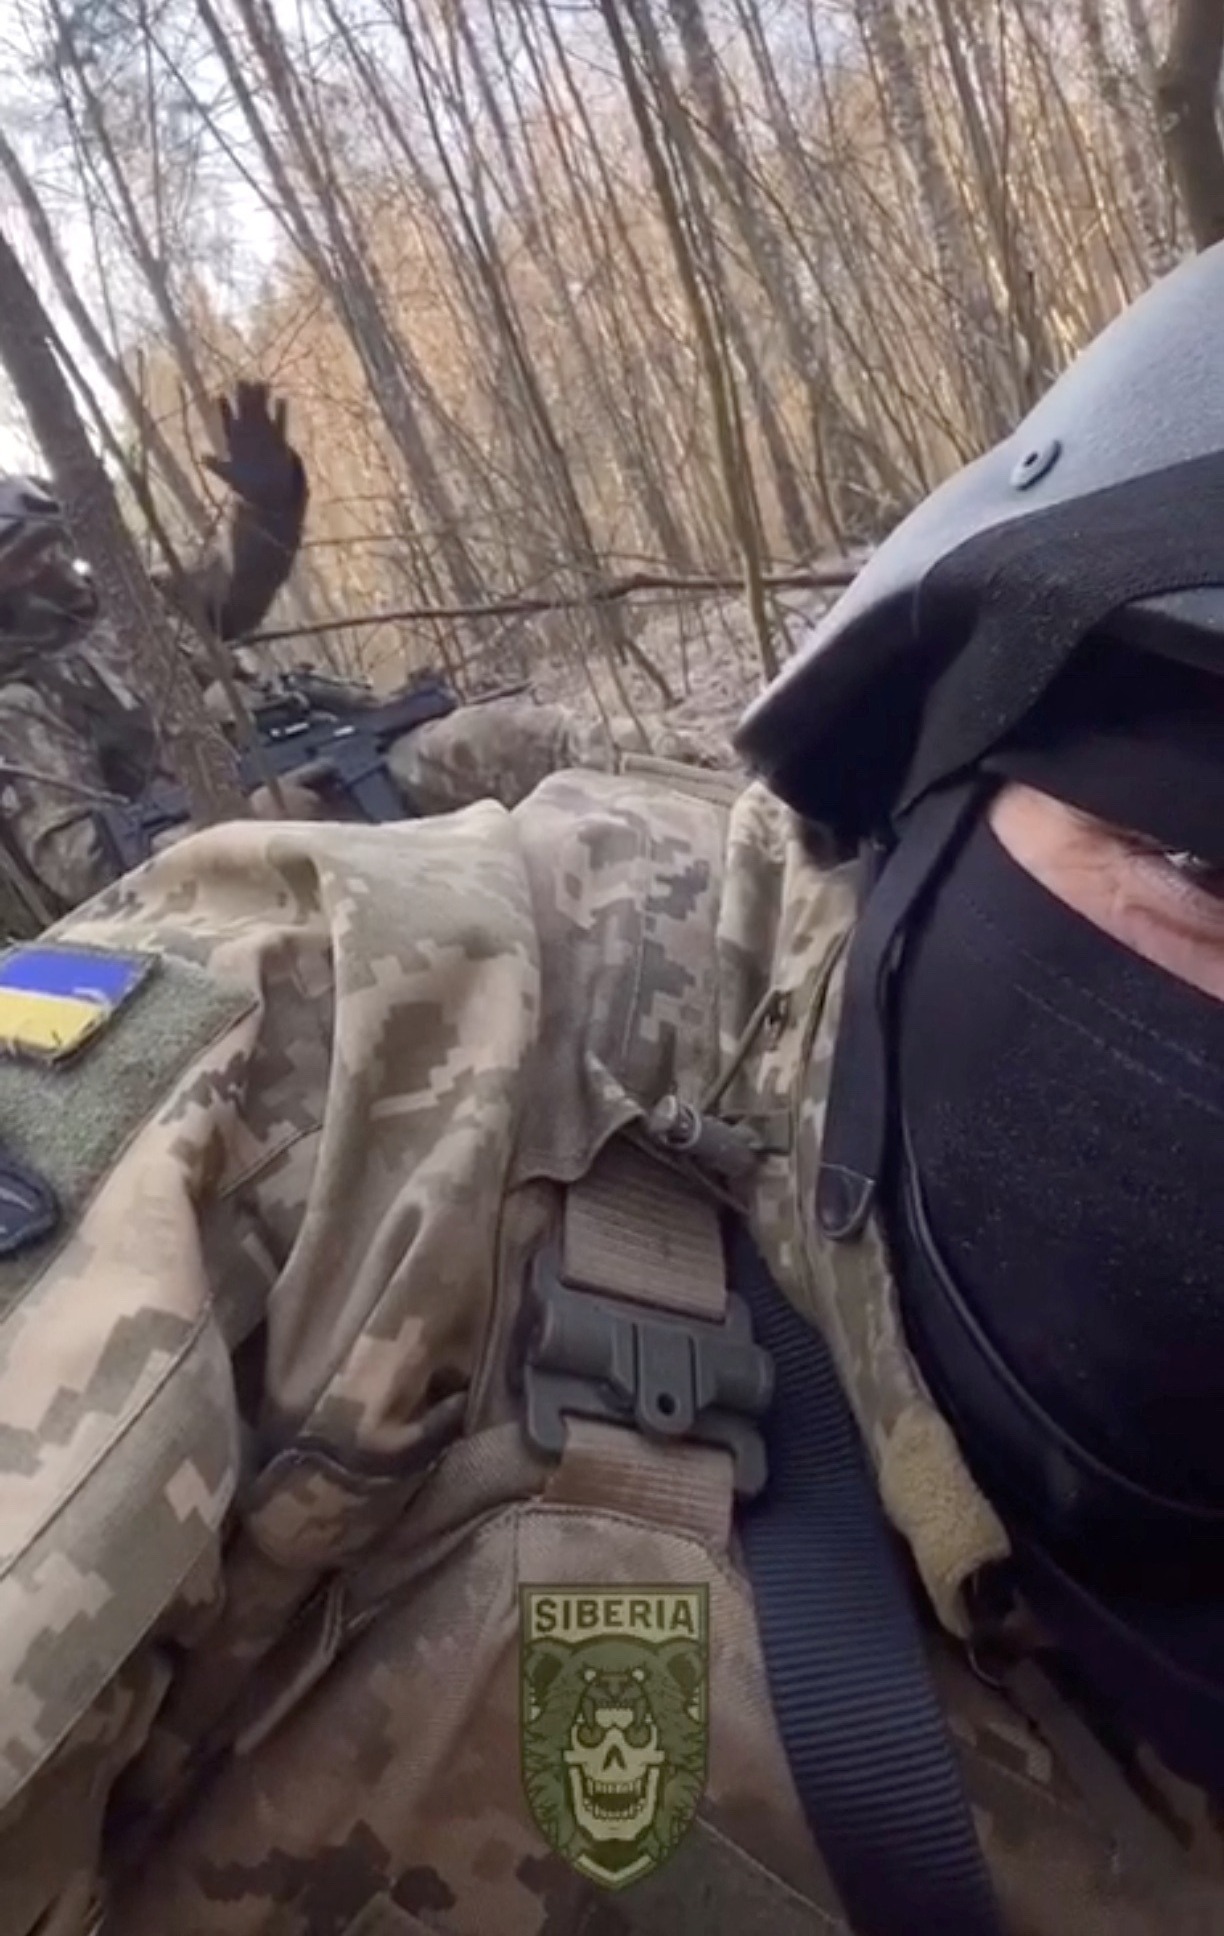 More fighters from the anti-Putin fighting force wave at the camera